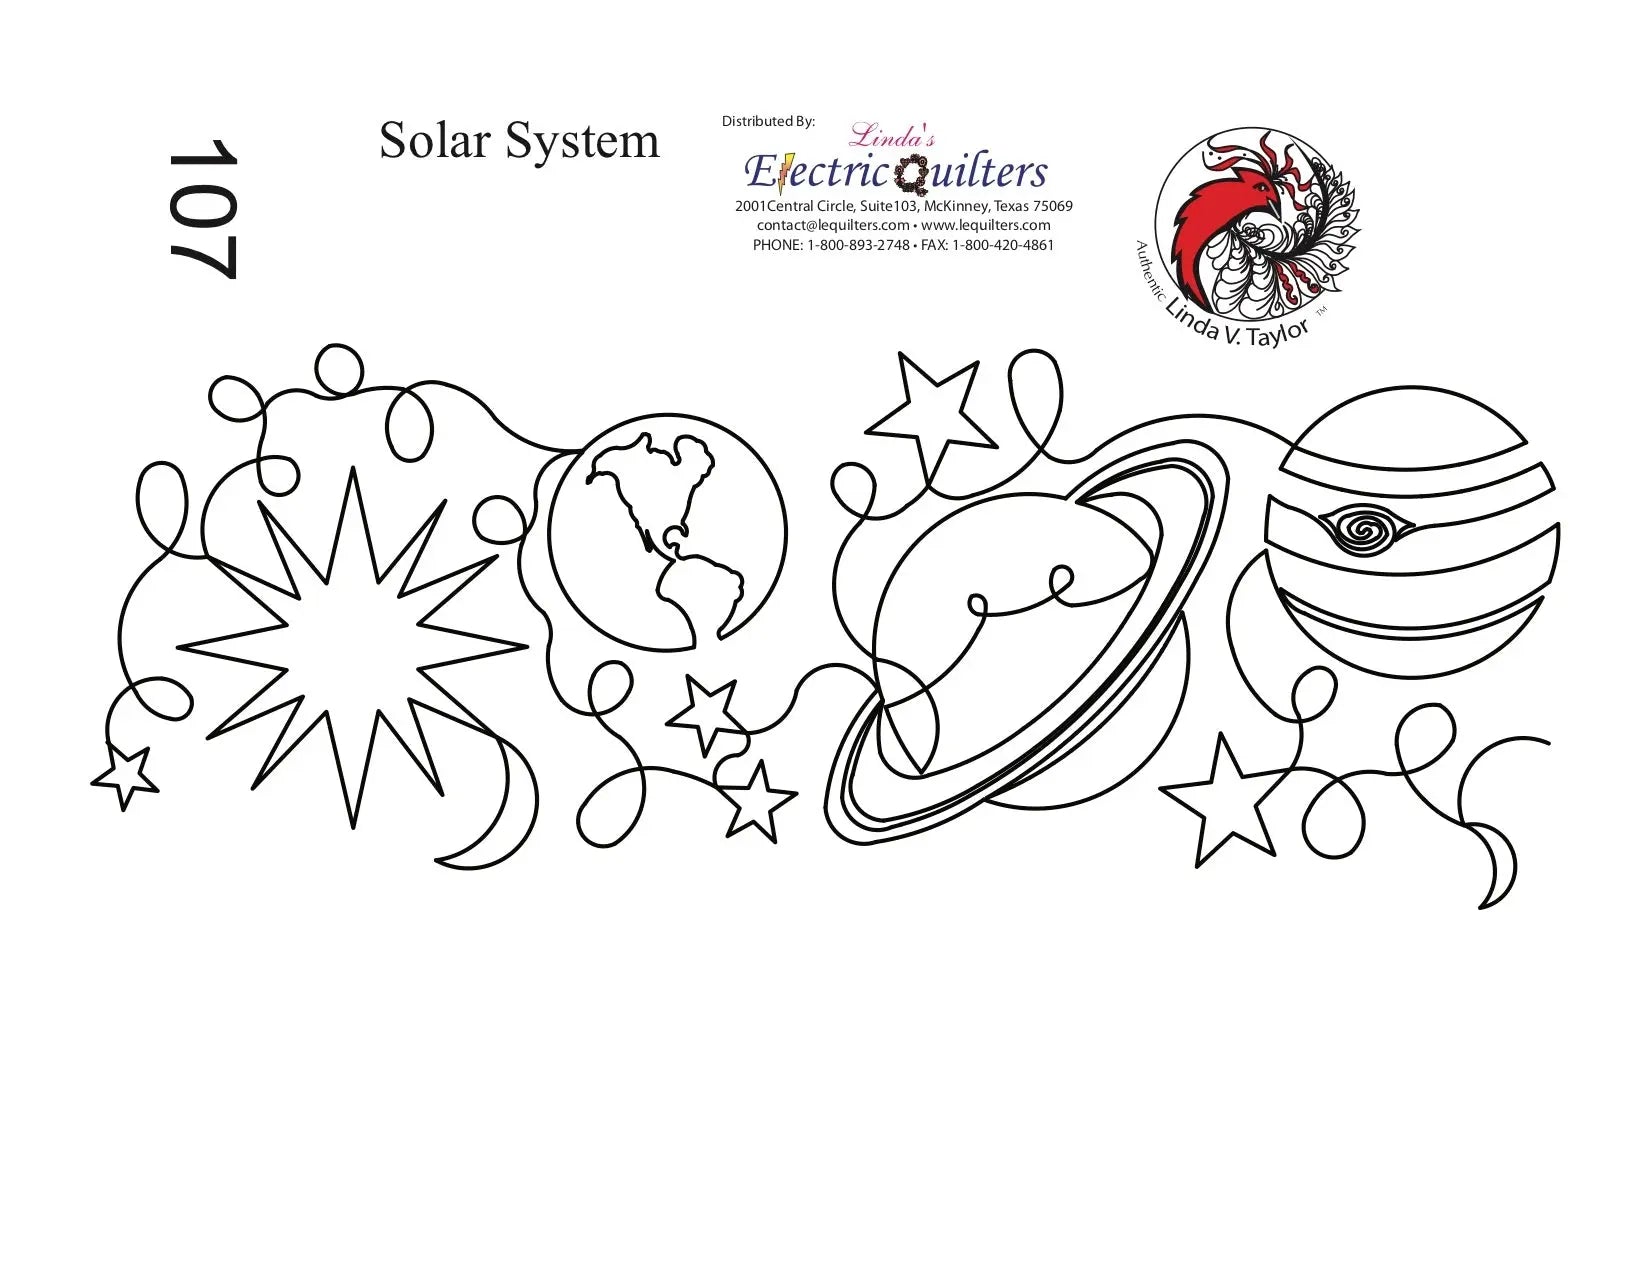 107 Solar System Pantograph by Linda V. Taylor - Linda's Electric Quilters